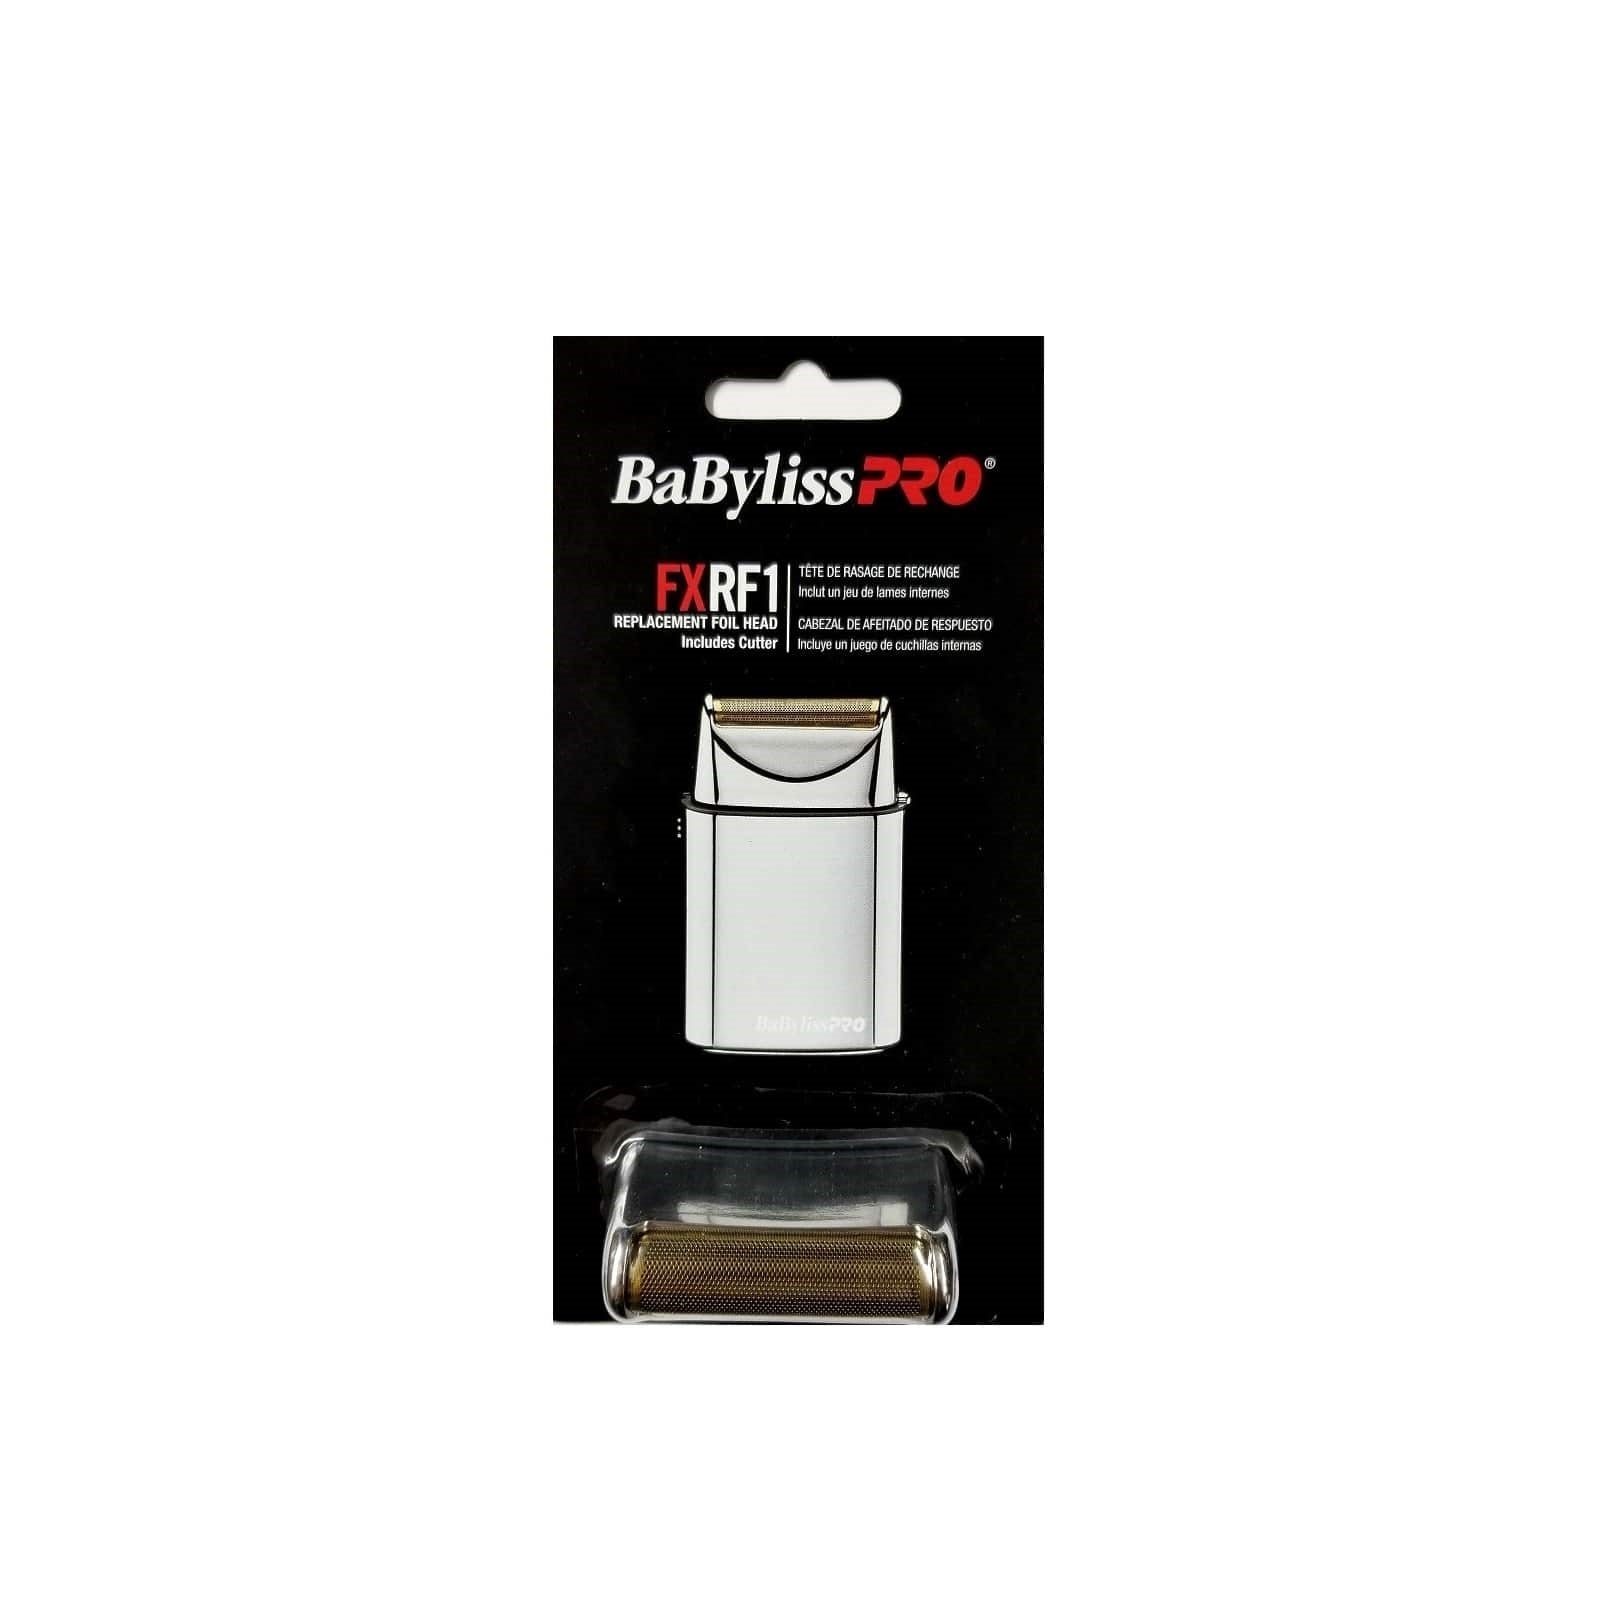 Babyliss PRO Single Foil Shaver Silver Replacement Foil And Cutter - FXRF1